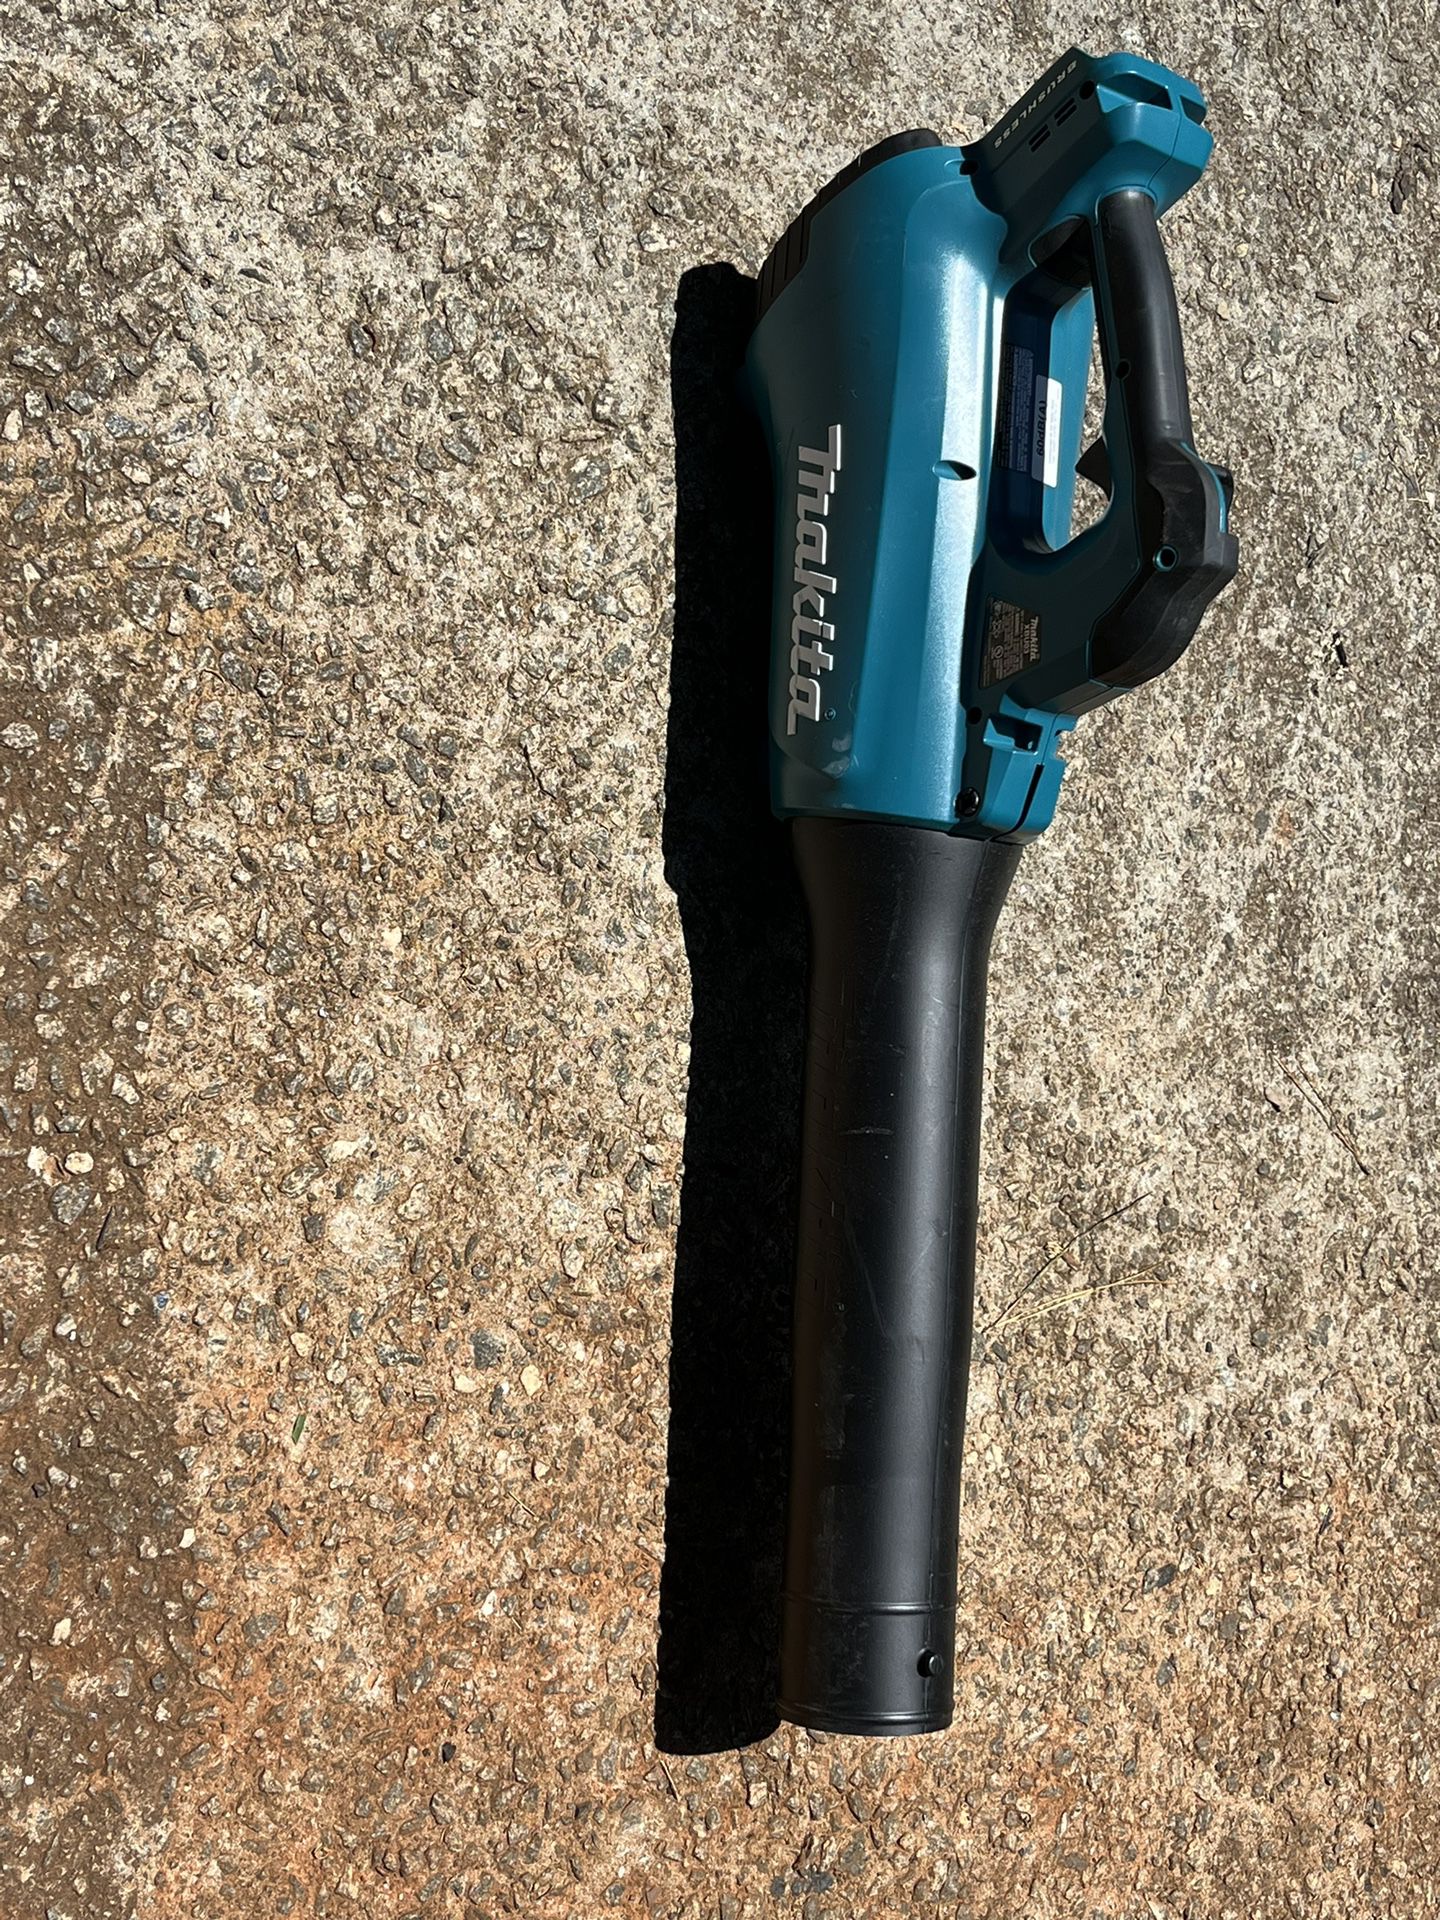 Makita 116 MPH 459 CFM 18V LXT Lithium-lon Brushless Cordless Leaf Blower (Tool-Only) used 40